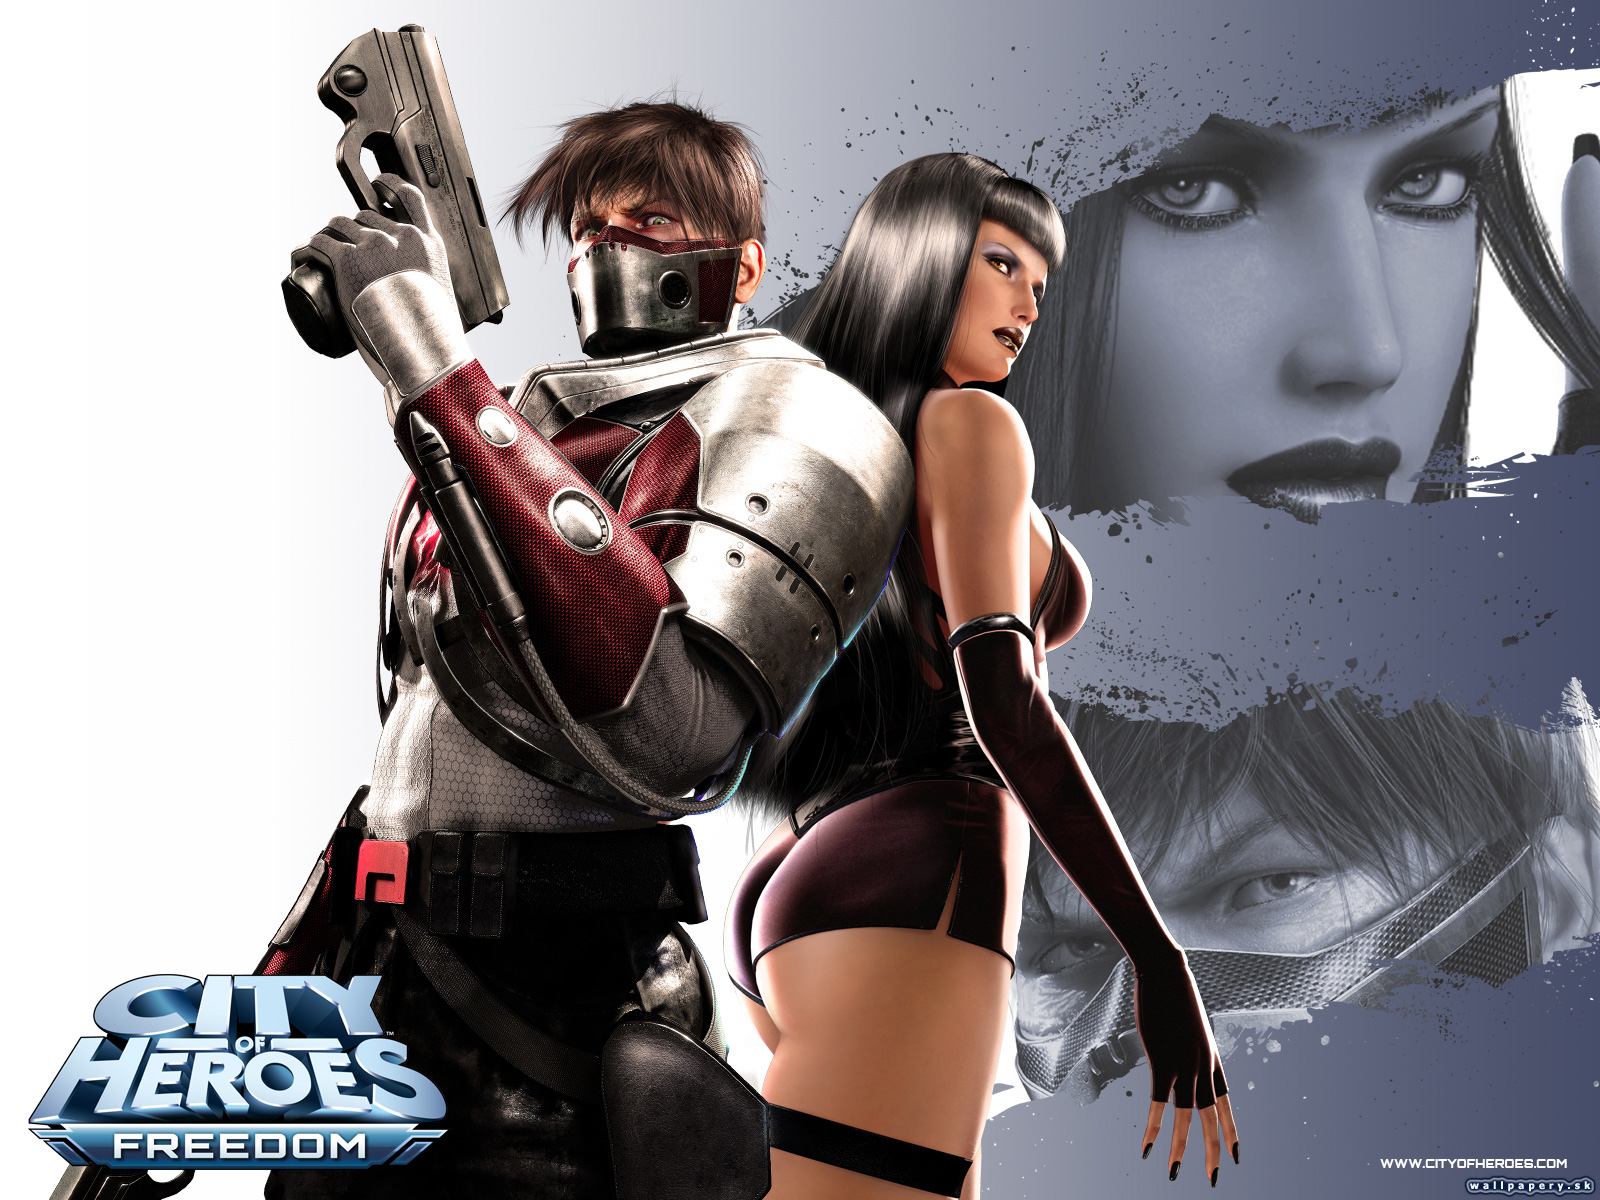 City of Heroes: Freedom - wallpaper 2